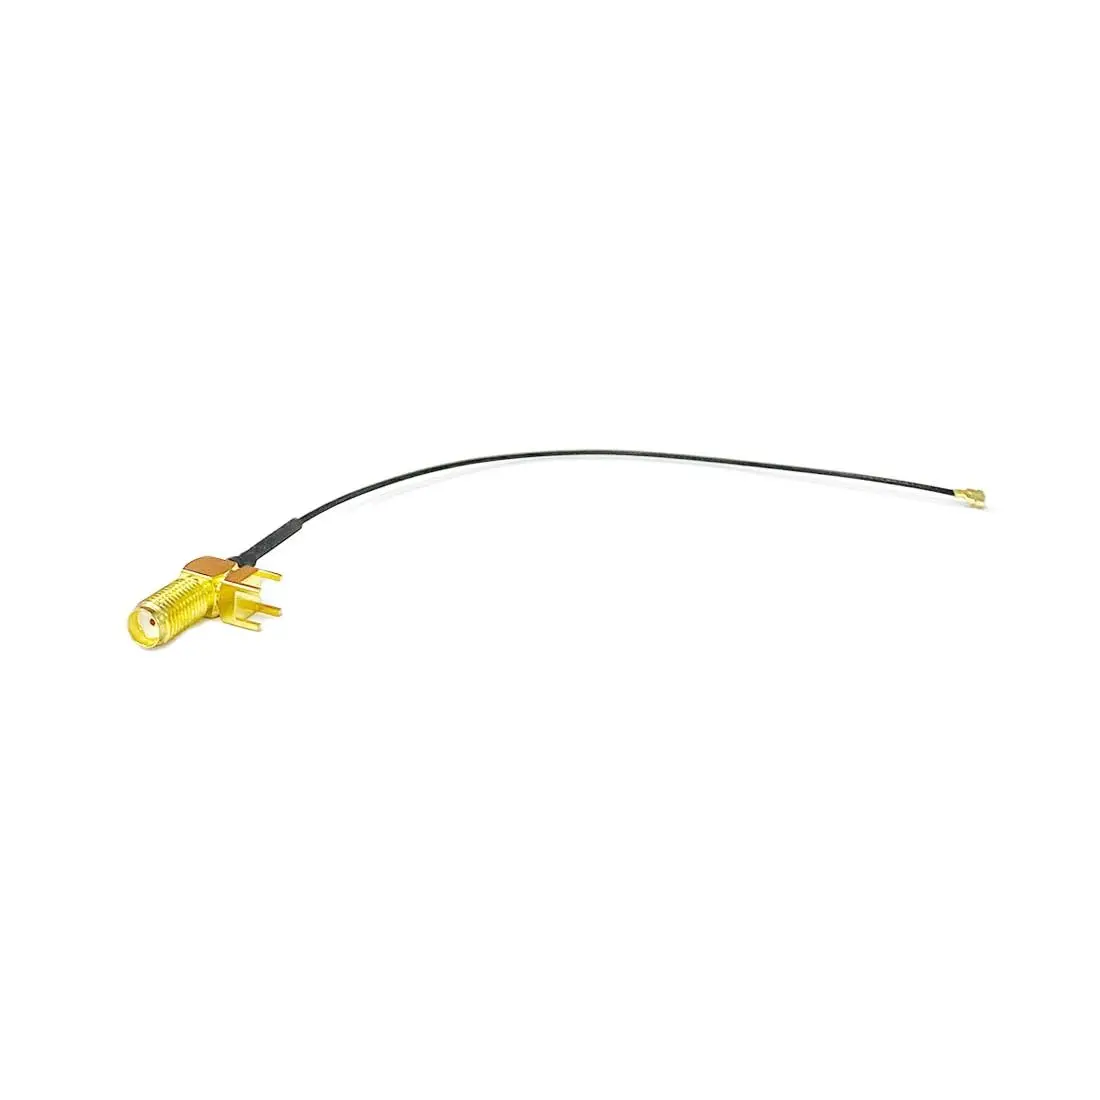 UFL.IPX Female to SMA Female PCB Connector Pigtail Wifi Antenna Coaxial Pigtail Extension 1.13mm Cable #2